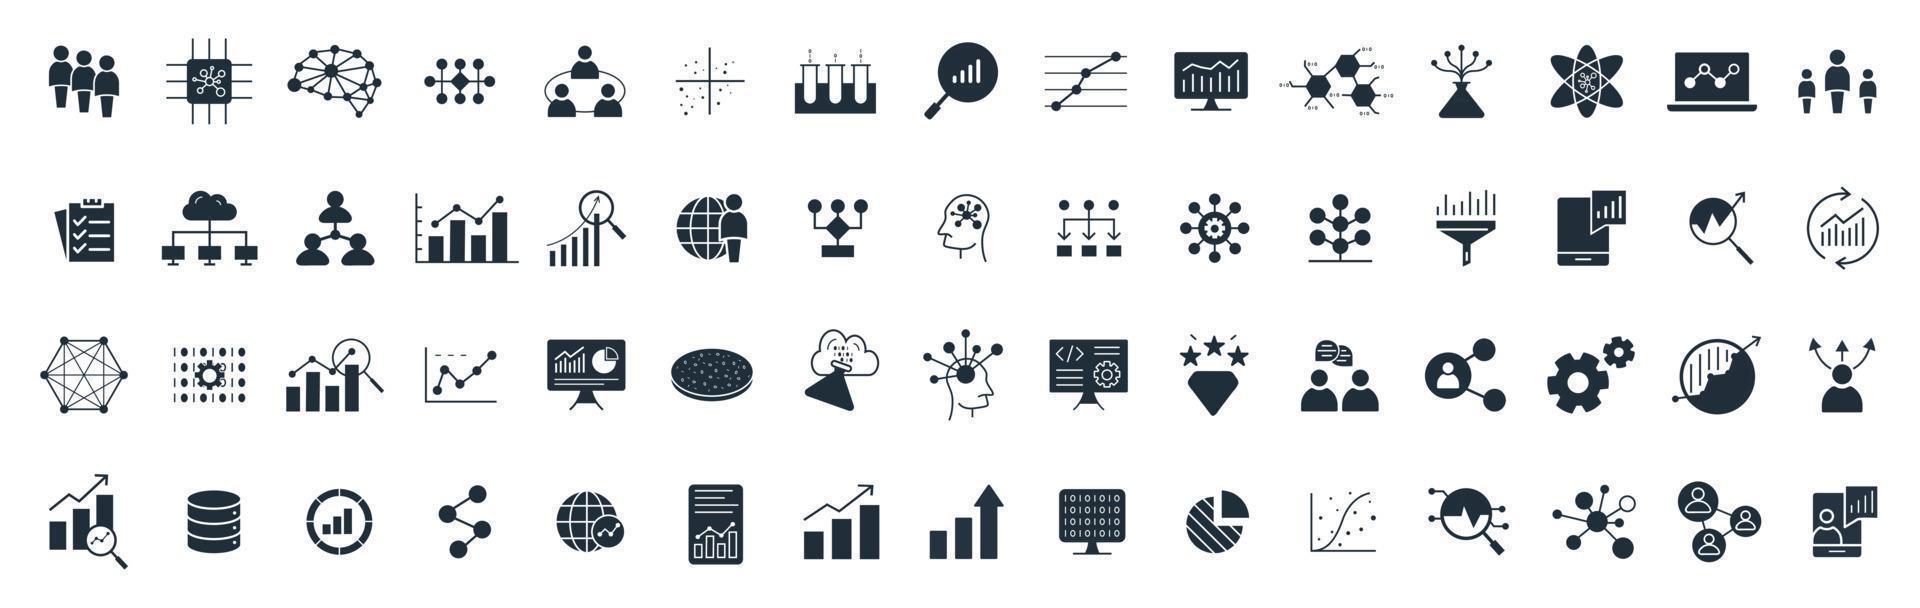 Analysis, statics, engineering, Data Science, and people team icon set vector